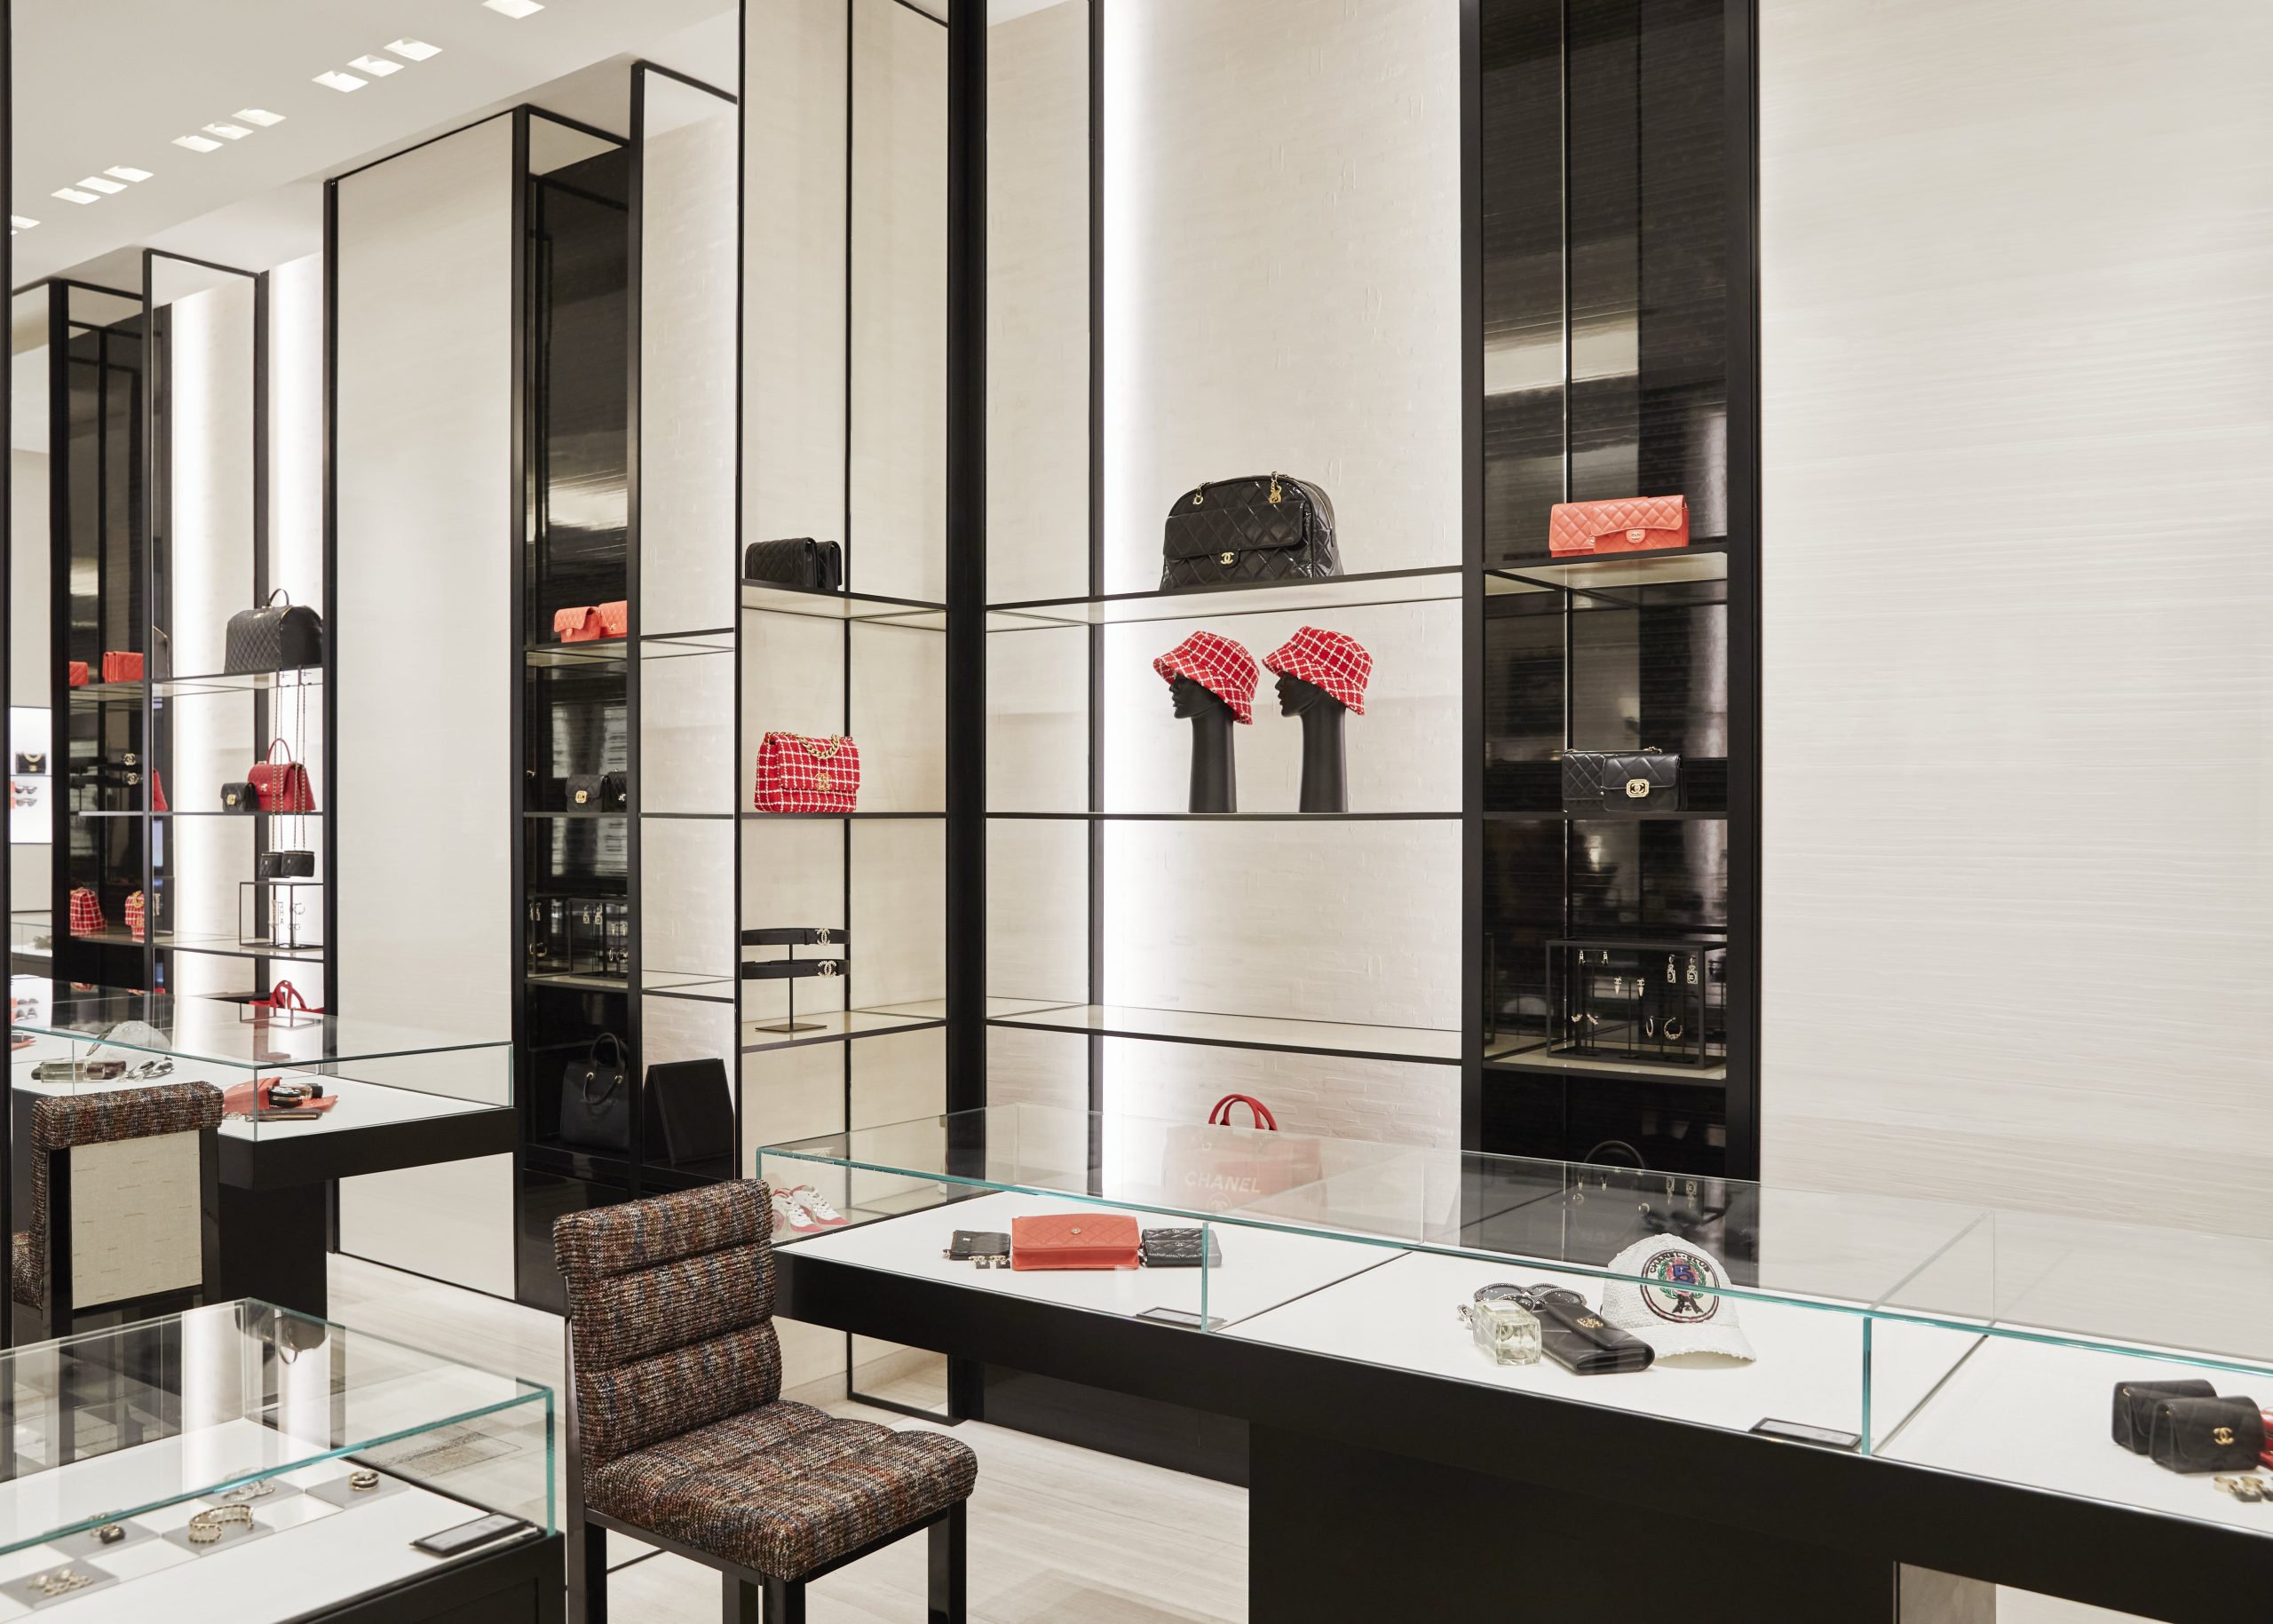 Chanel opens fashion and beauty spaces at Paris CDG Terminal 1